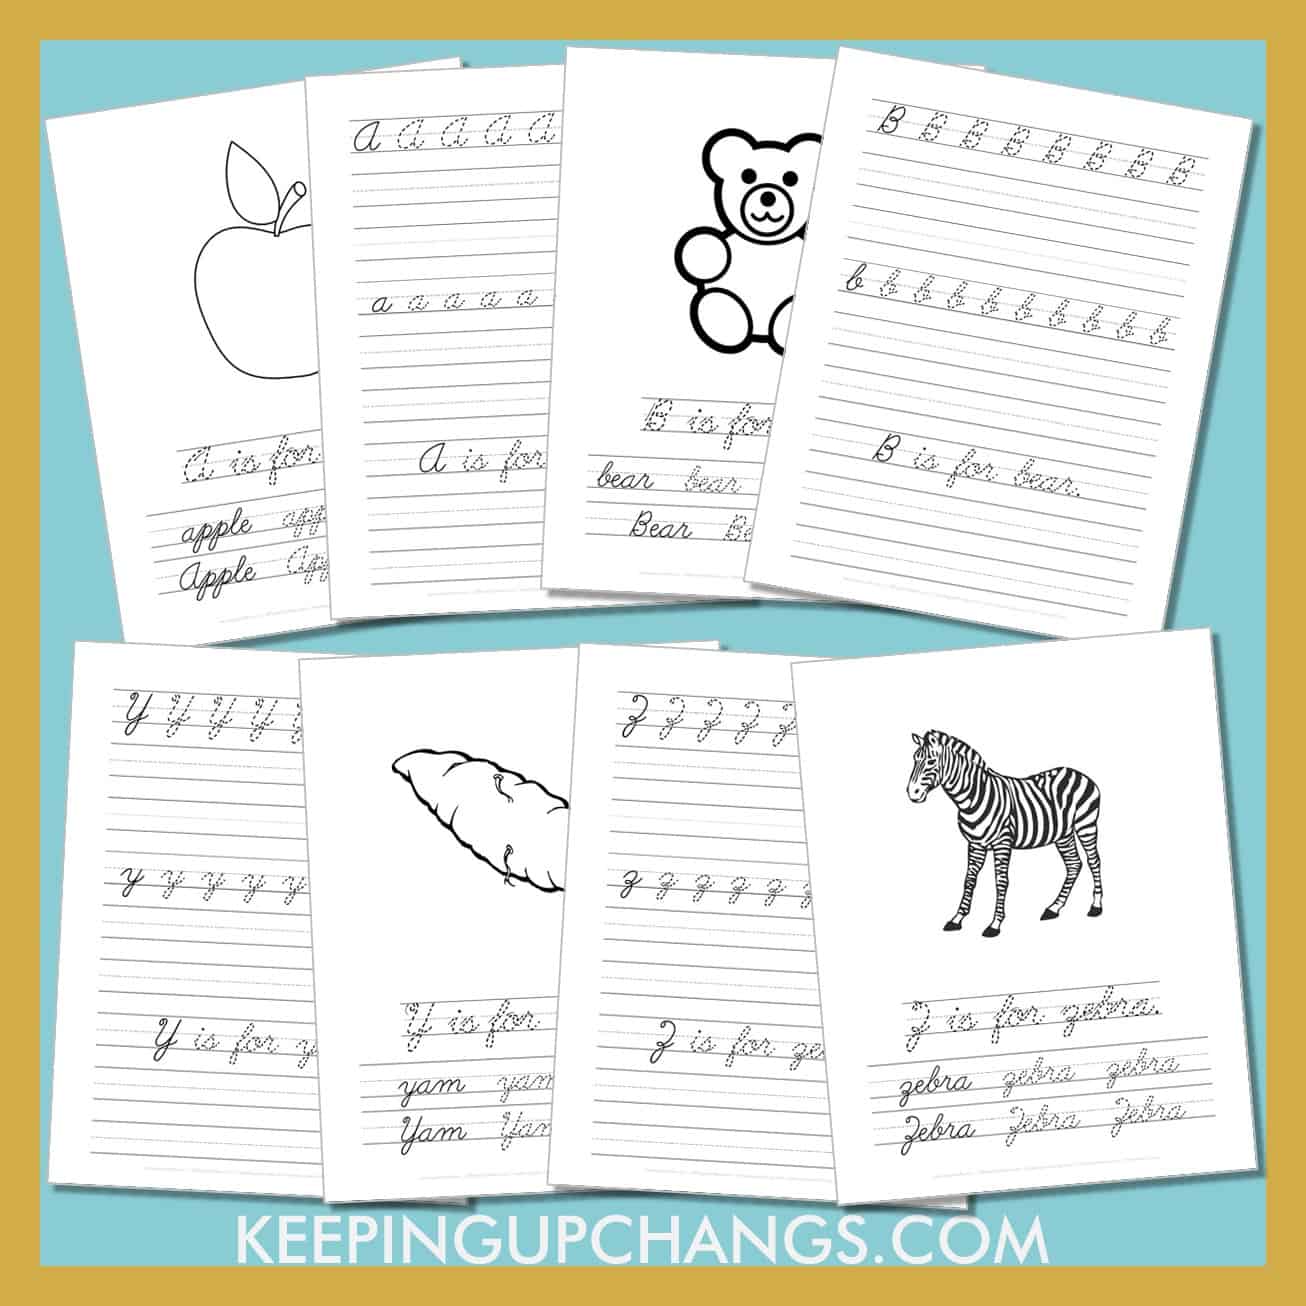 free cursive worksheet printables with image, upper and lowercase letters, simple sentence.